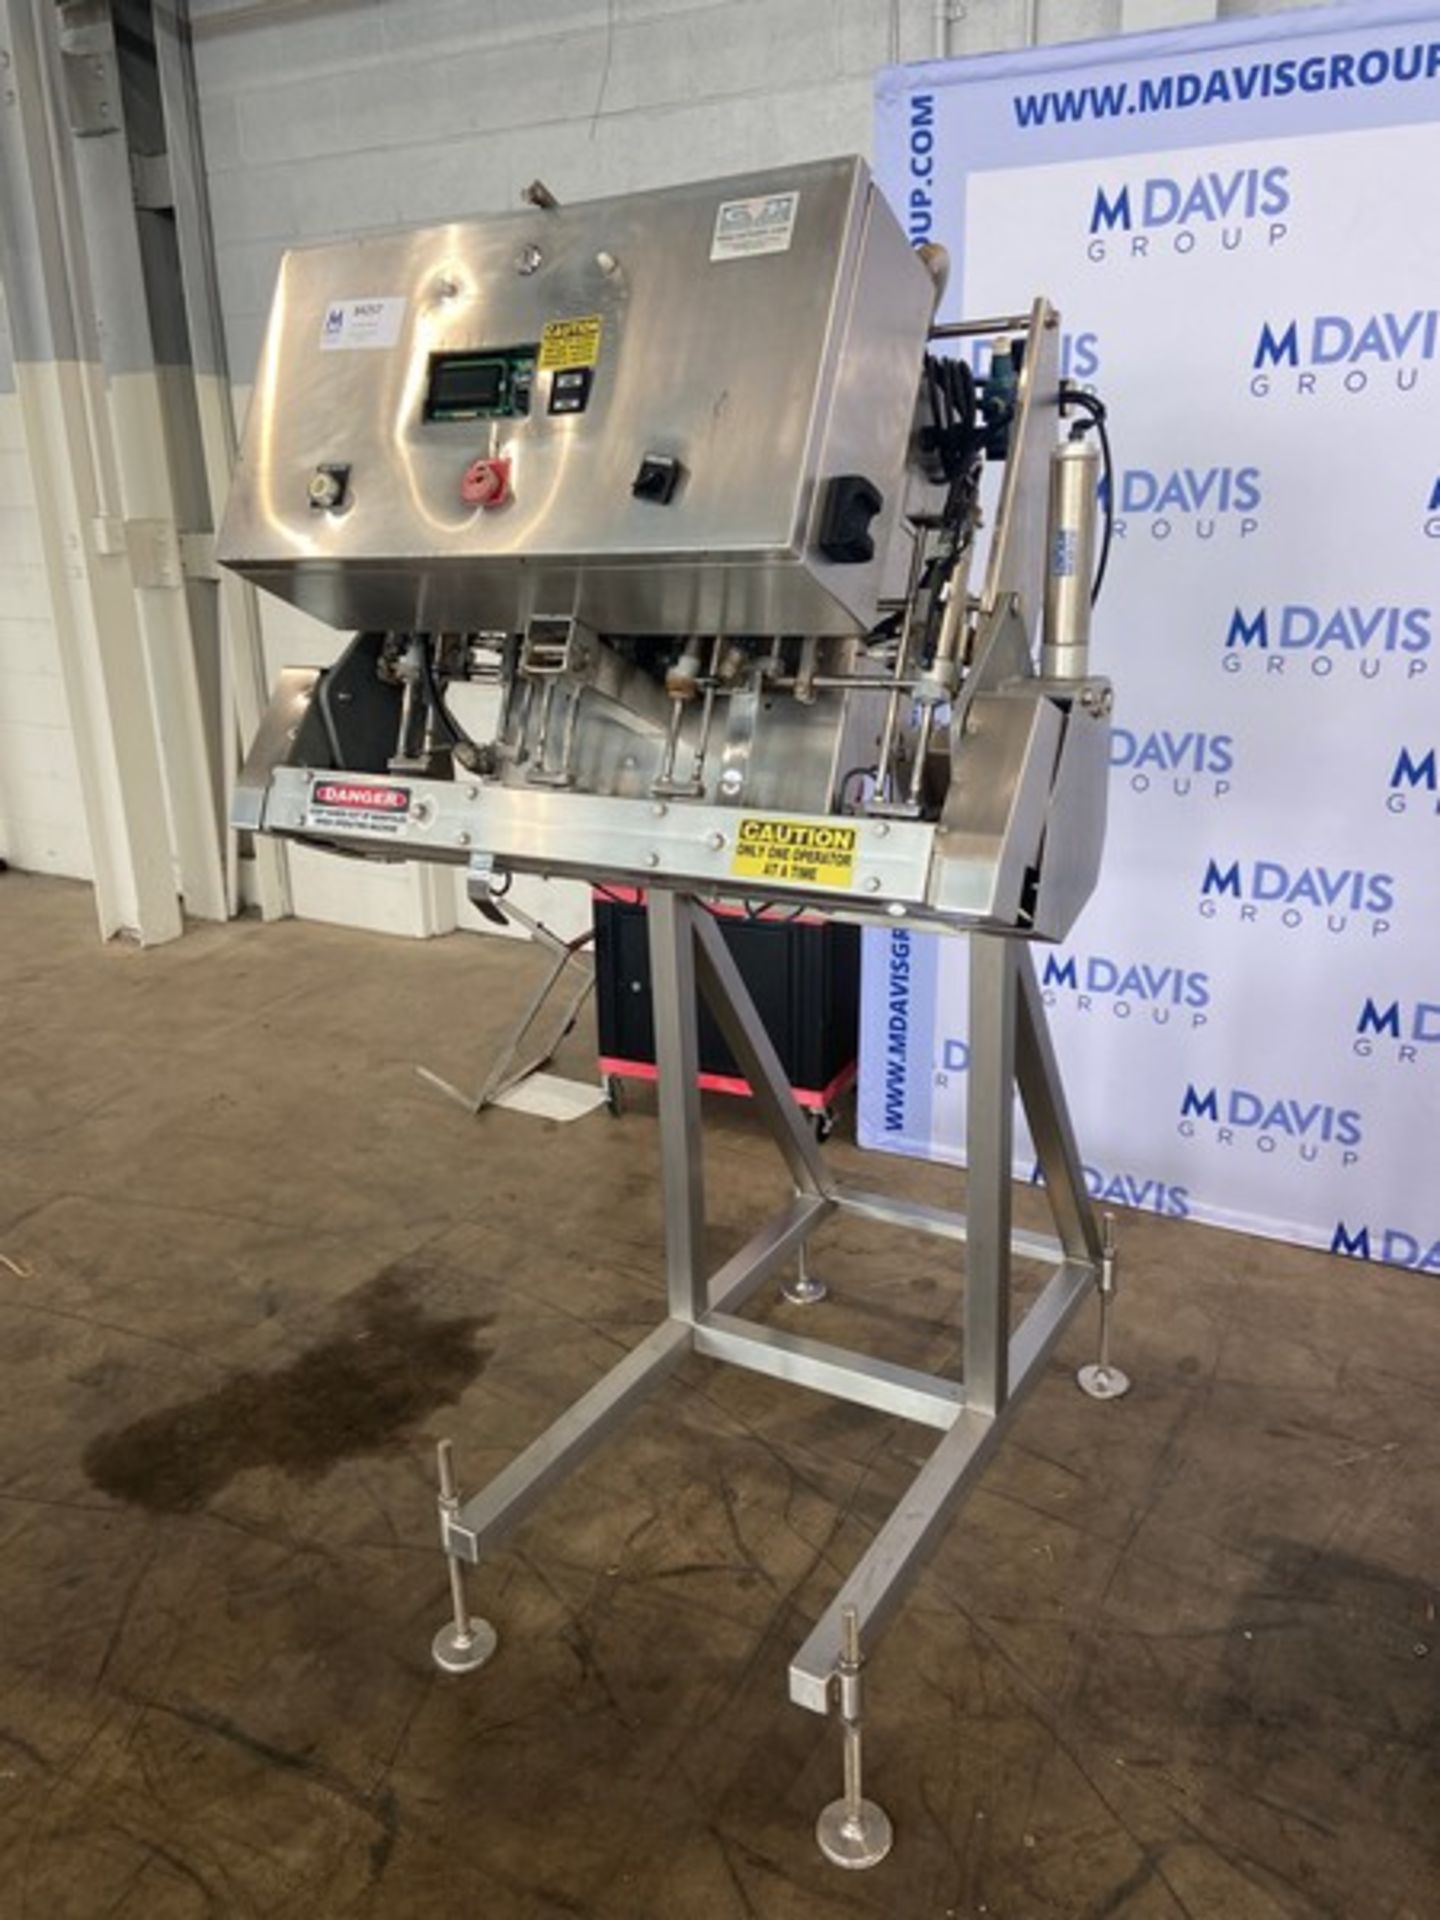 CVP Systems Inc. Bag Sealer, M/N A-600, S/N 0437-17, 120 Volts, 1 Phase, Mounted on S/S Frame (INV#